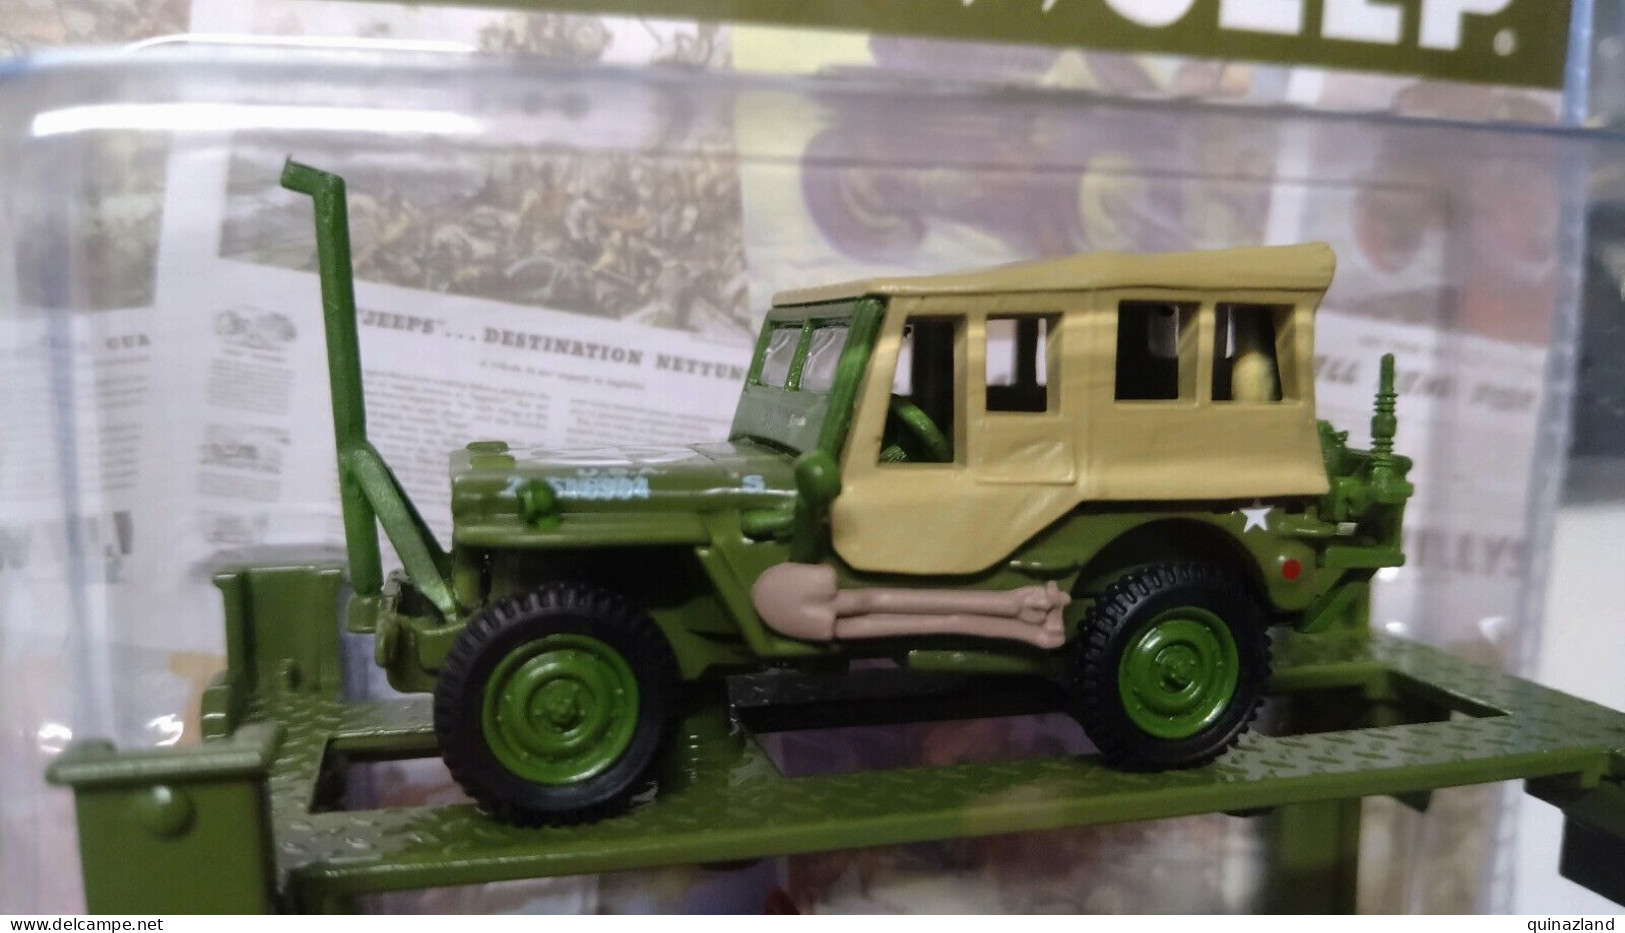 M2 Machines Auto-Lift Willy's Jeep 1944 Jeep MB (NG129) - Autres & Non Classés